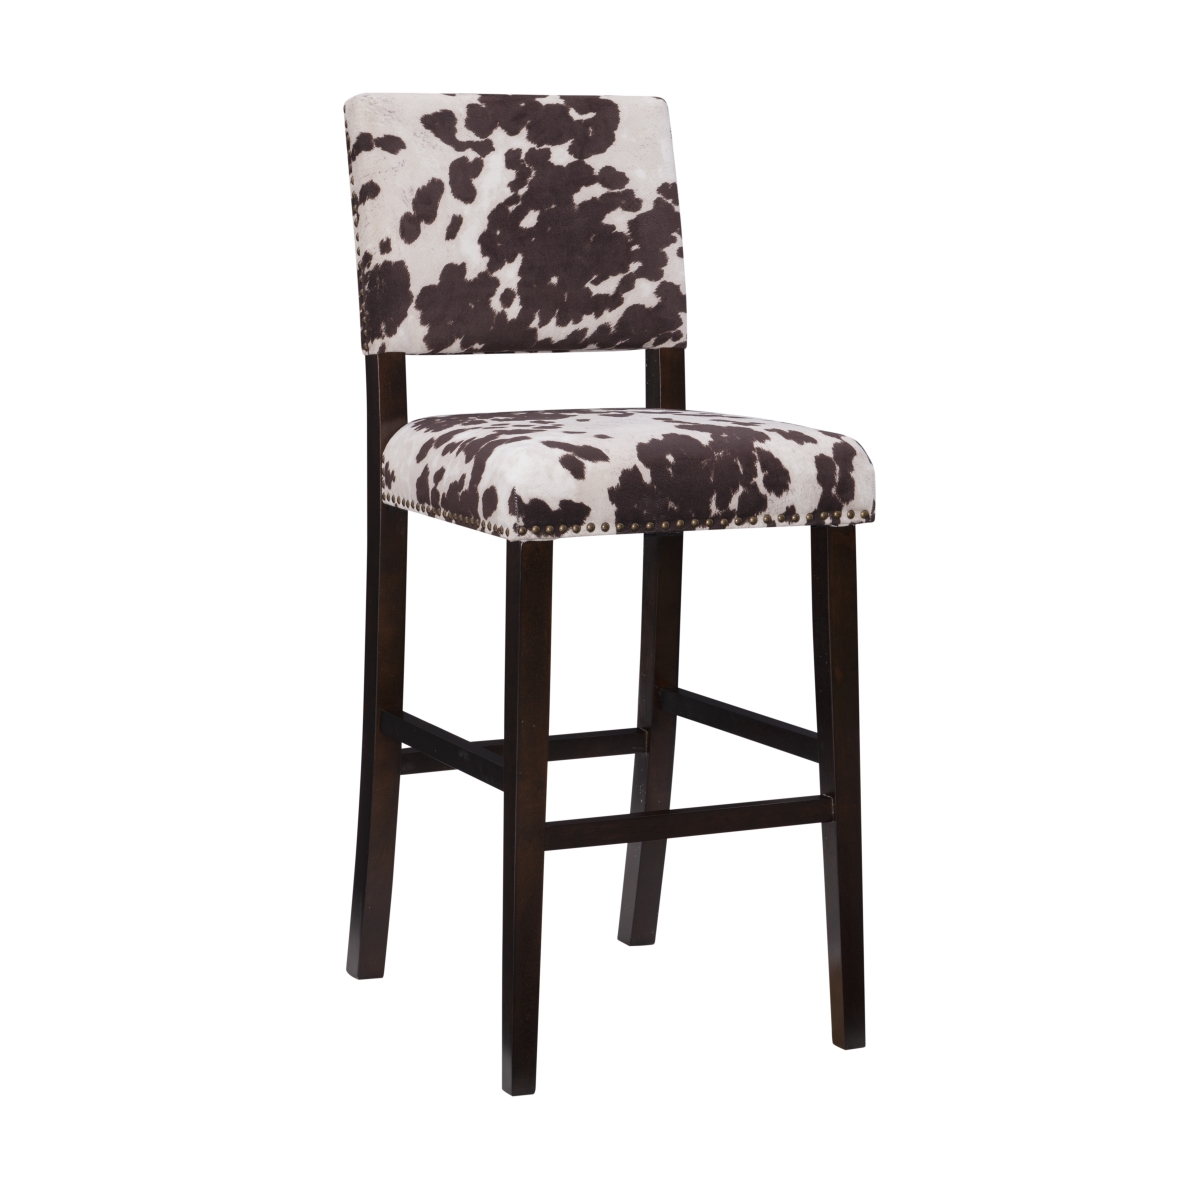 Picture of Linon Home Decor 14061UDD01U 44.75 x 19 x 22.5 in. Corey Udder Madness Manhattan Stain Bar Stool